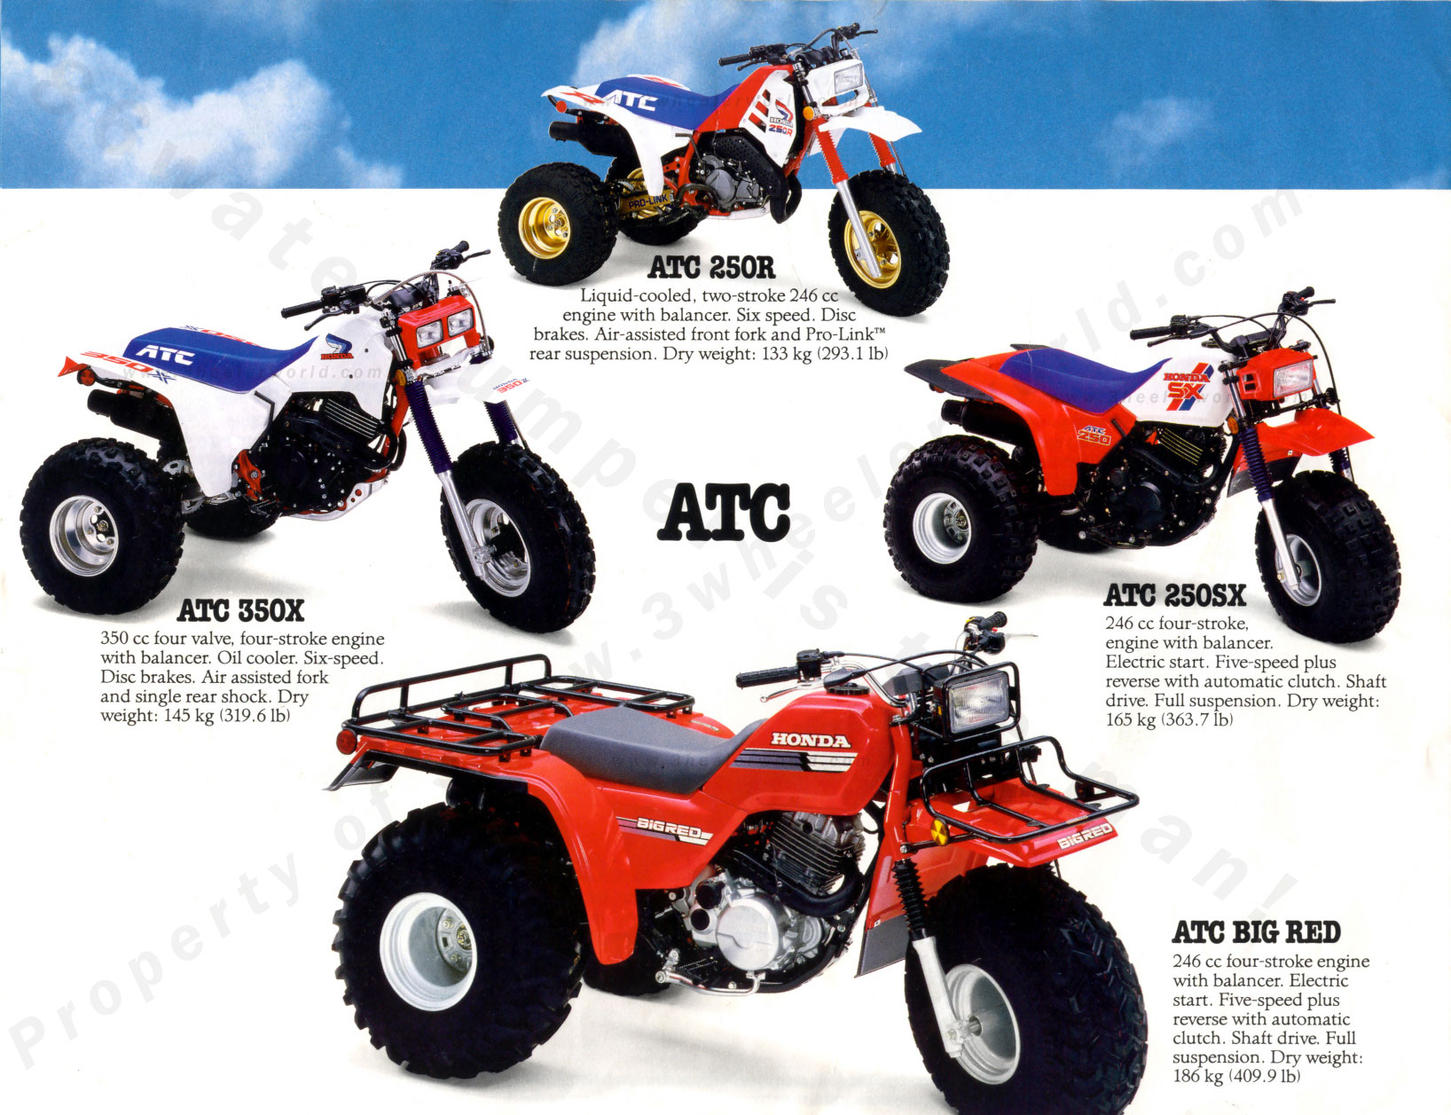 This brochure, originally from Canada shows the 1987 year model machines. Including the ever elusive '87 year model ATC250R, and ATC350X.